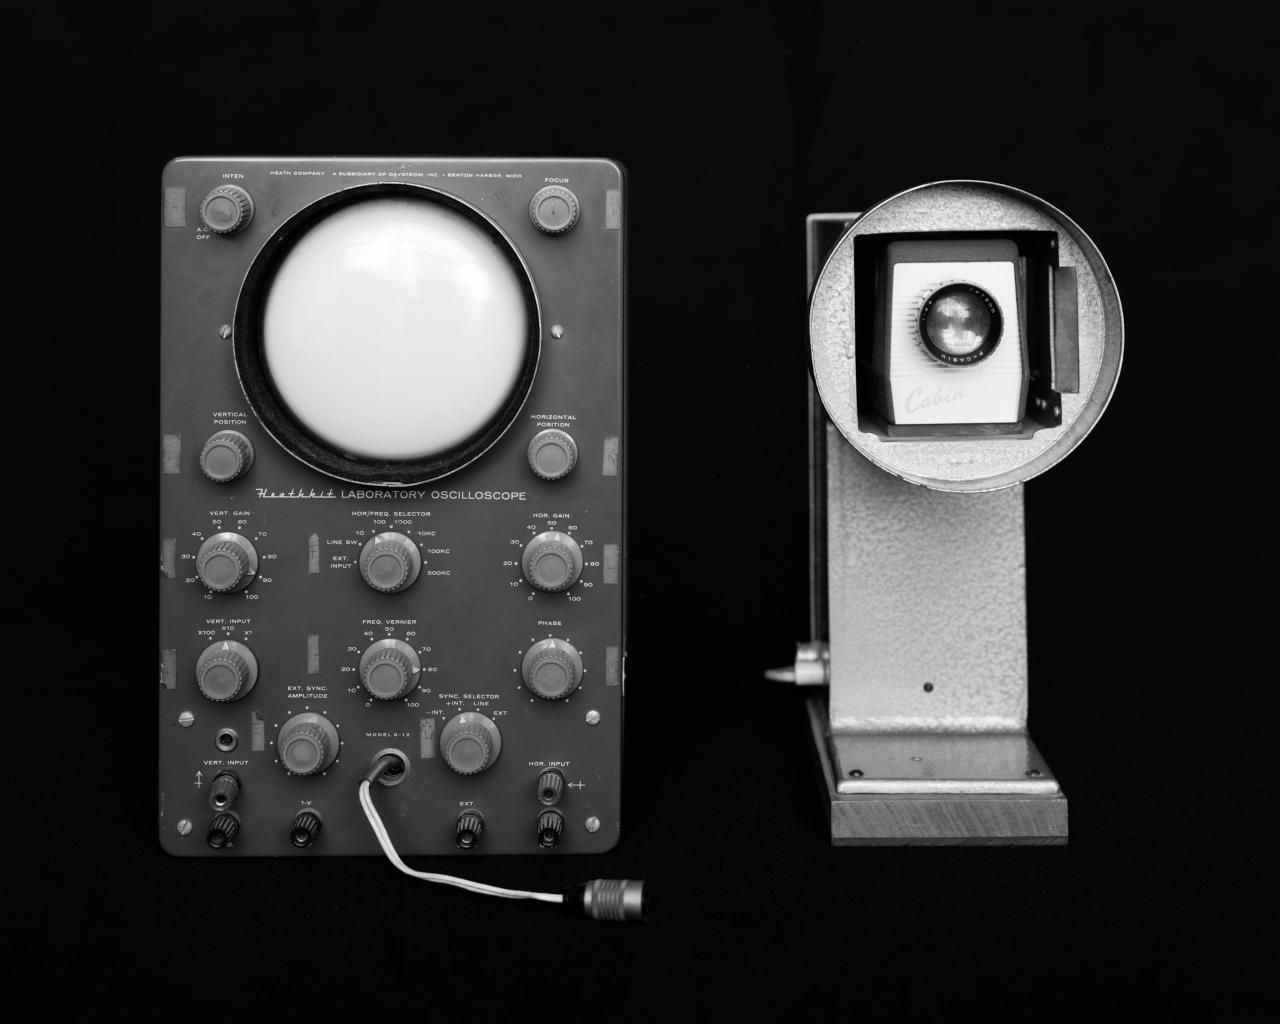 Devices from the historic studio Hermann Heiß